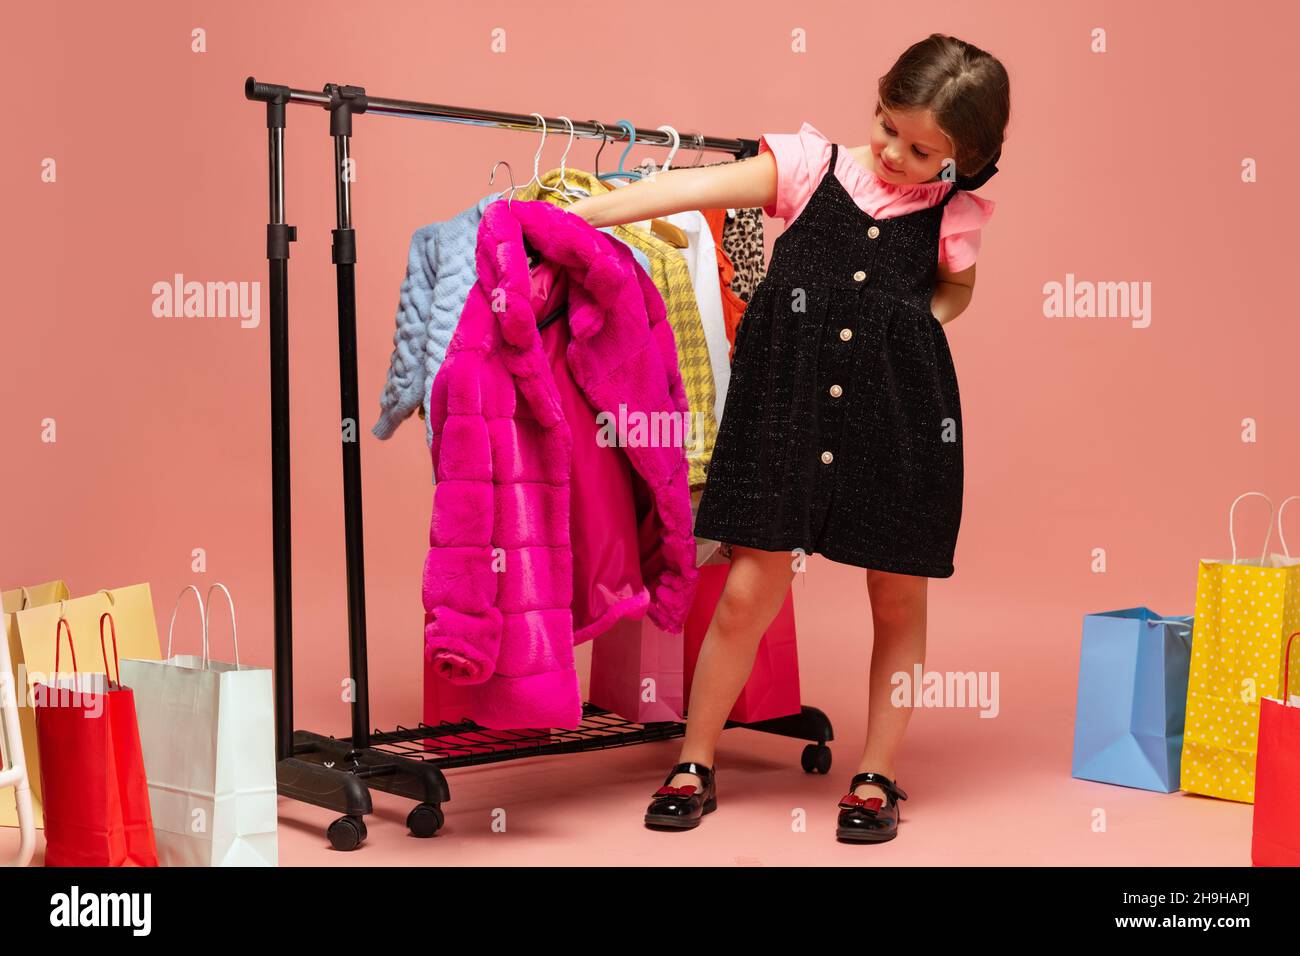 Little Child Girl Posing Hangers Dresses Clothes Her Room Kid Stock Photo  by ©jutar 497845202